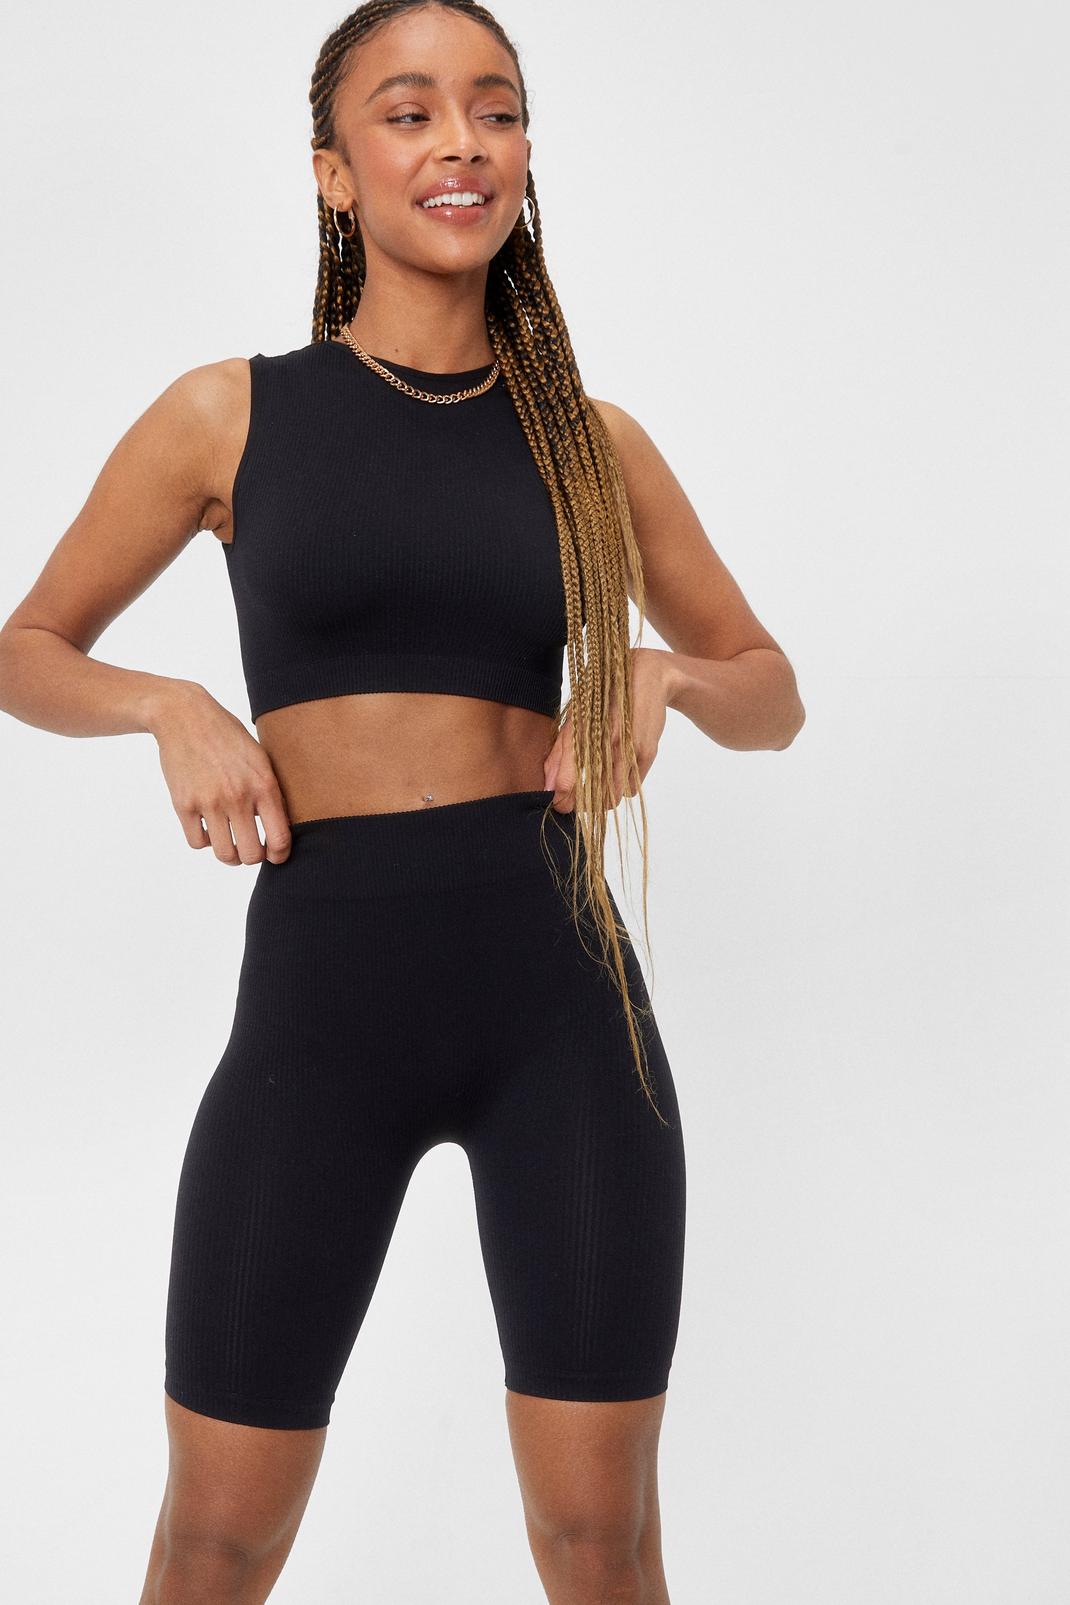 sollys Folde Se insekter Ribbed Sculpted Crop Top and Biker Shorts Two Piece Set | Nasty Gal